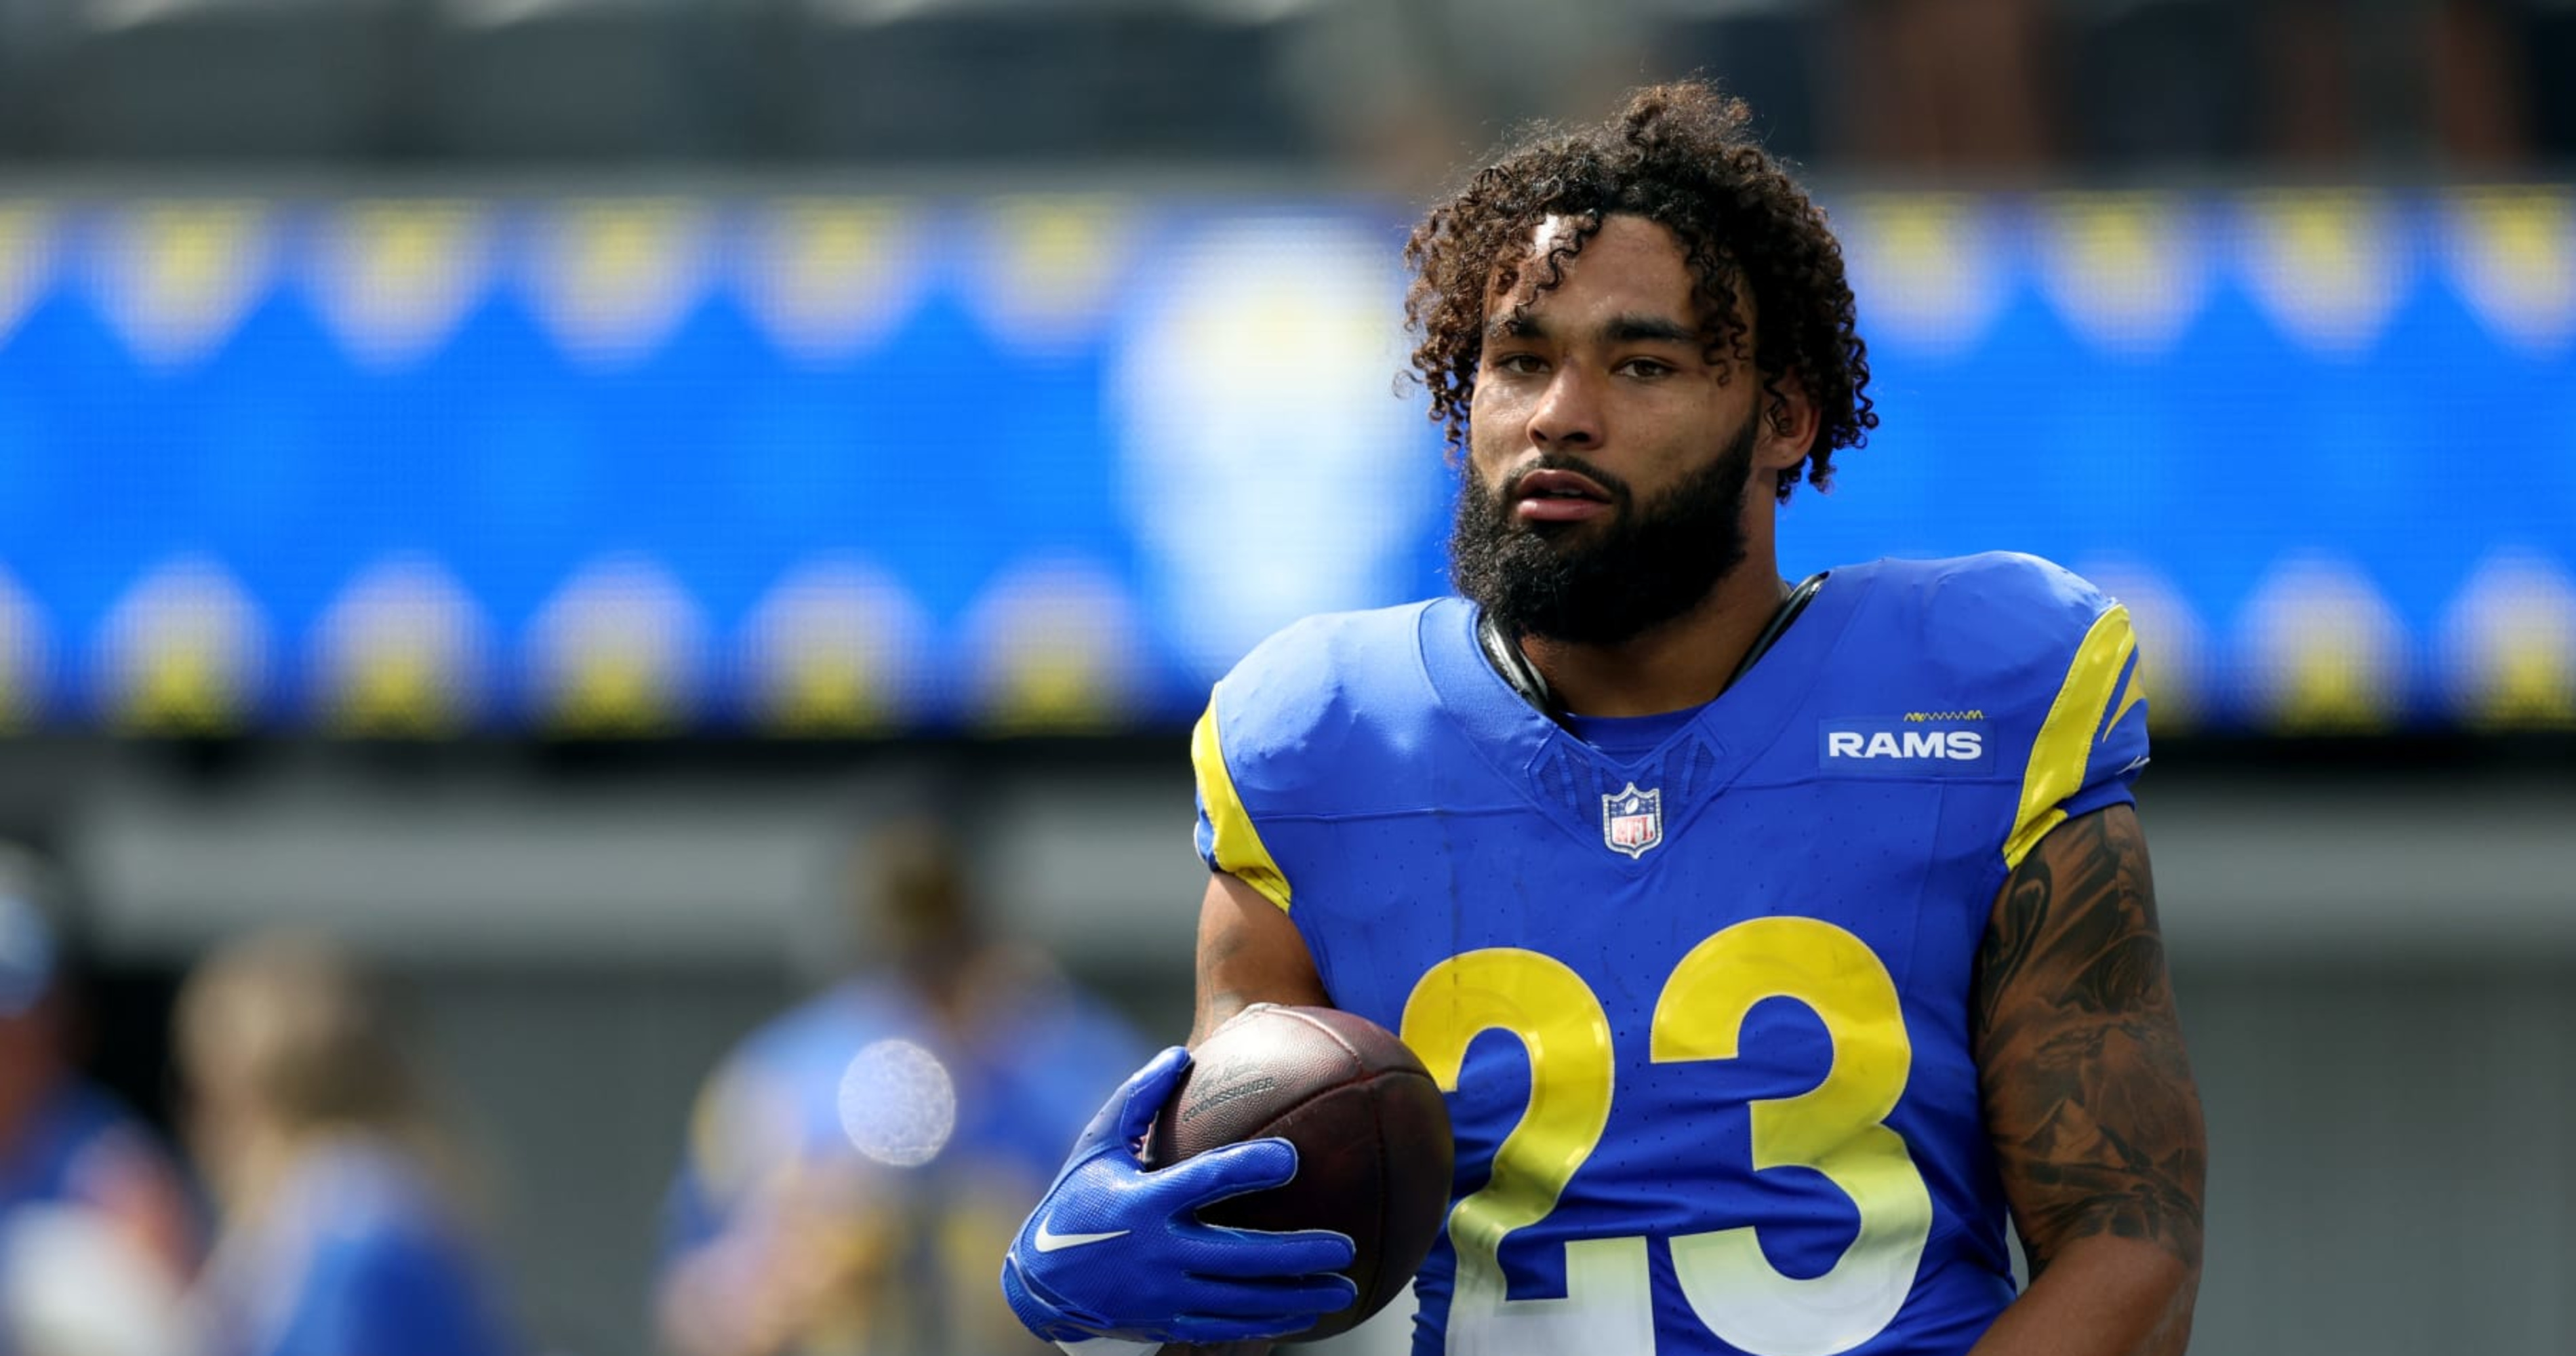 Kyren Williams Designated for Return by Rams; Missed Last 4 Games with Ankle Injury